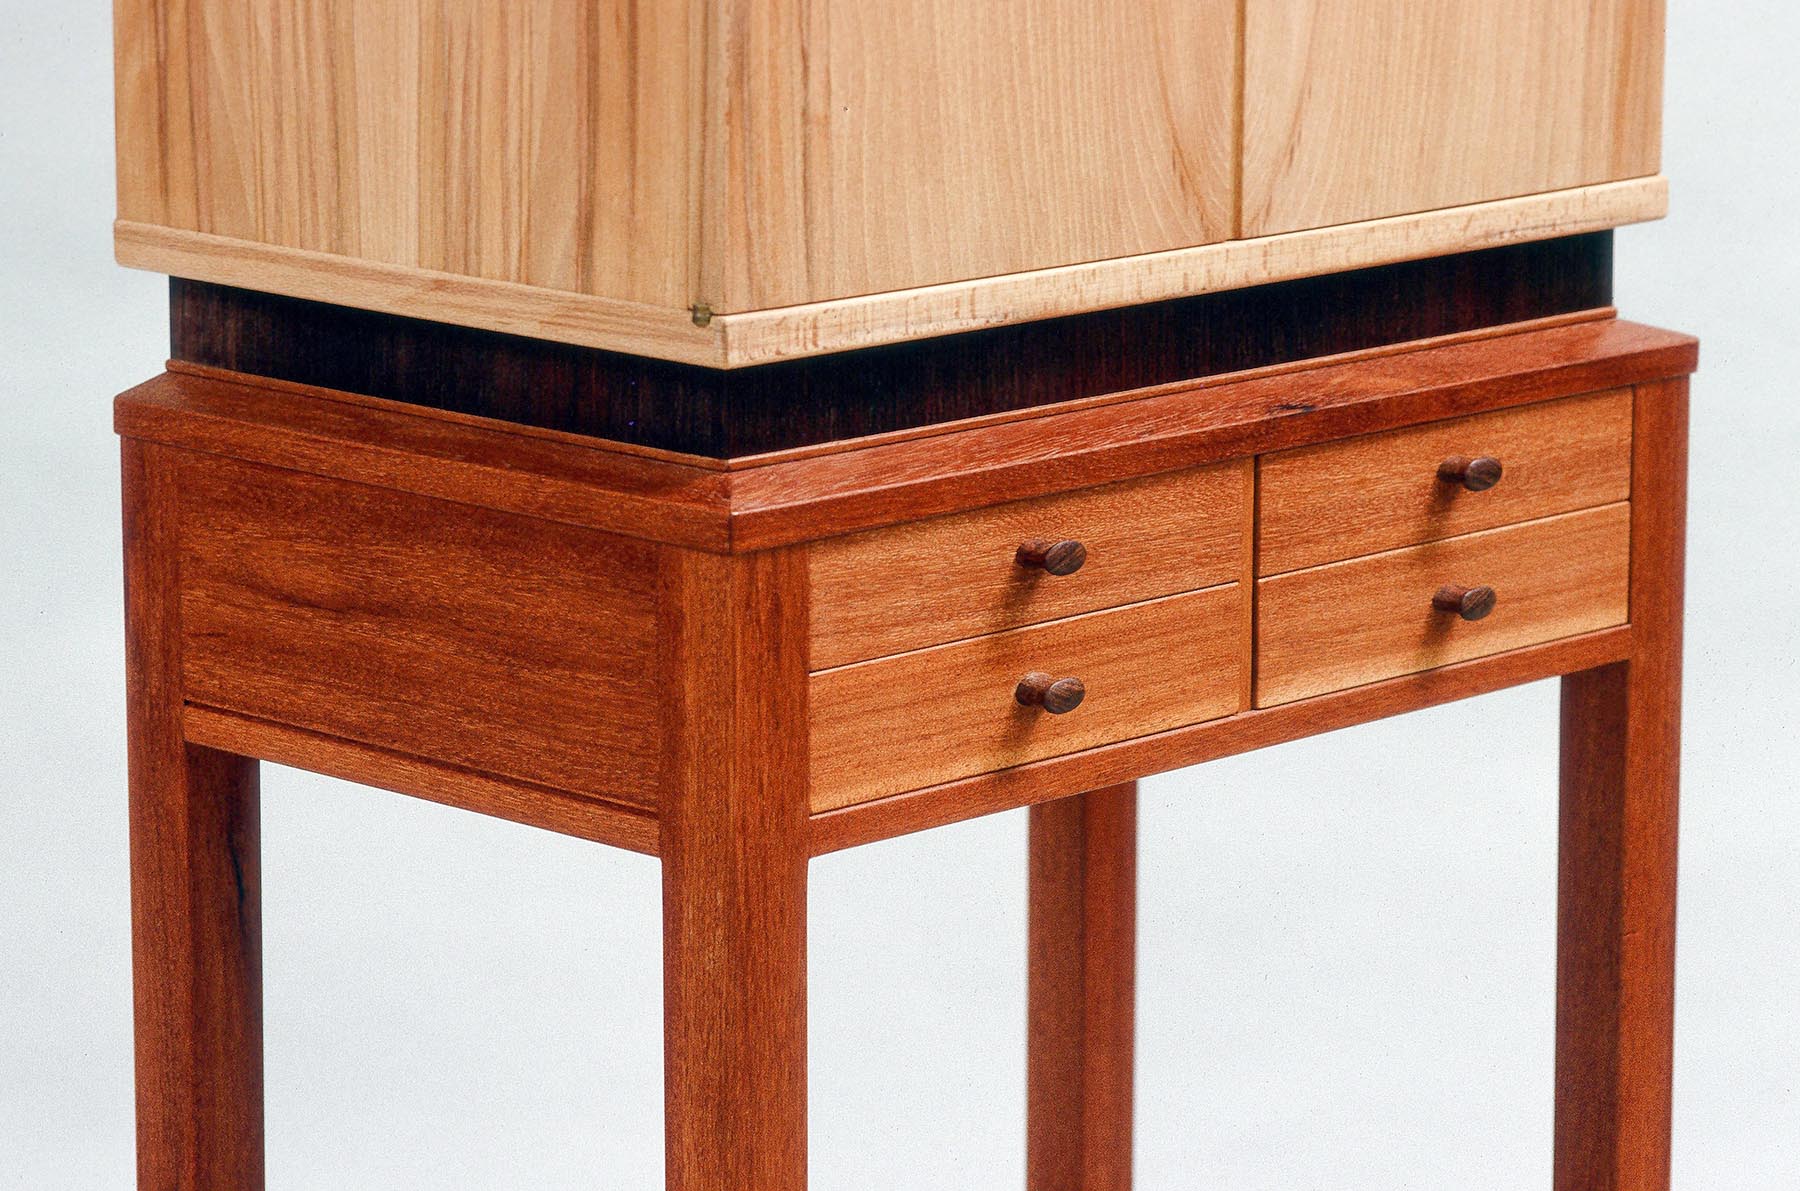 Beech Cabinet with Drawer Stand